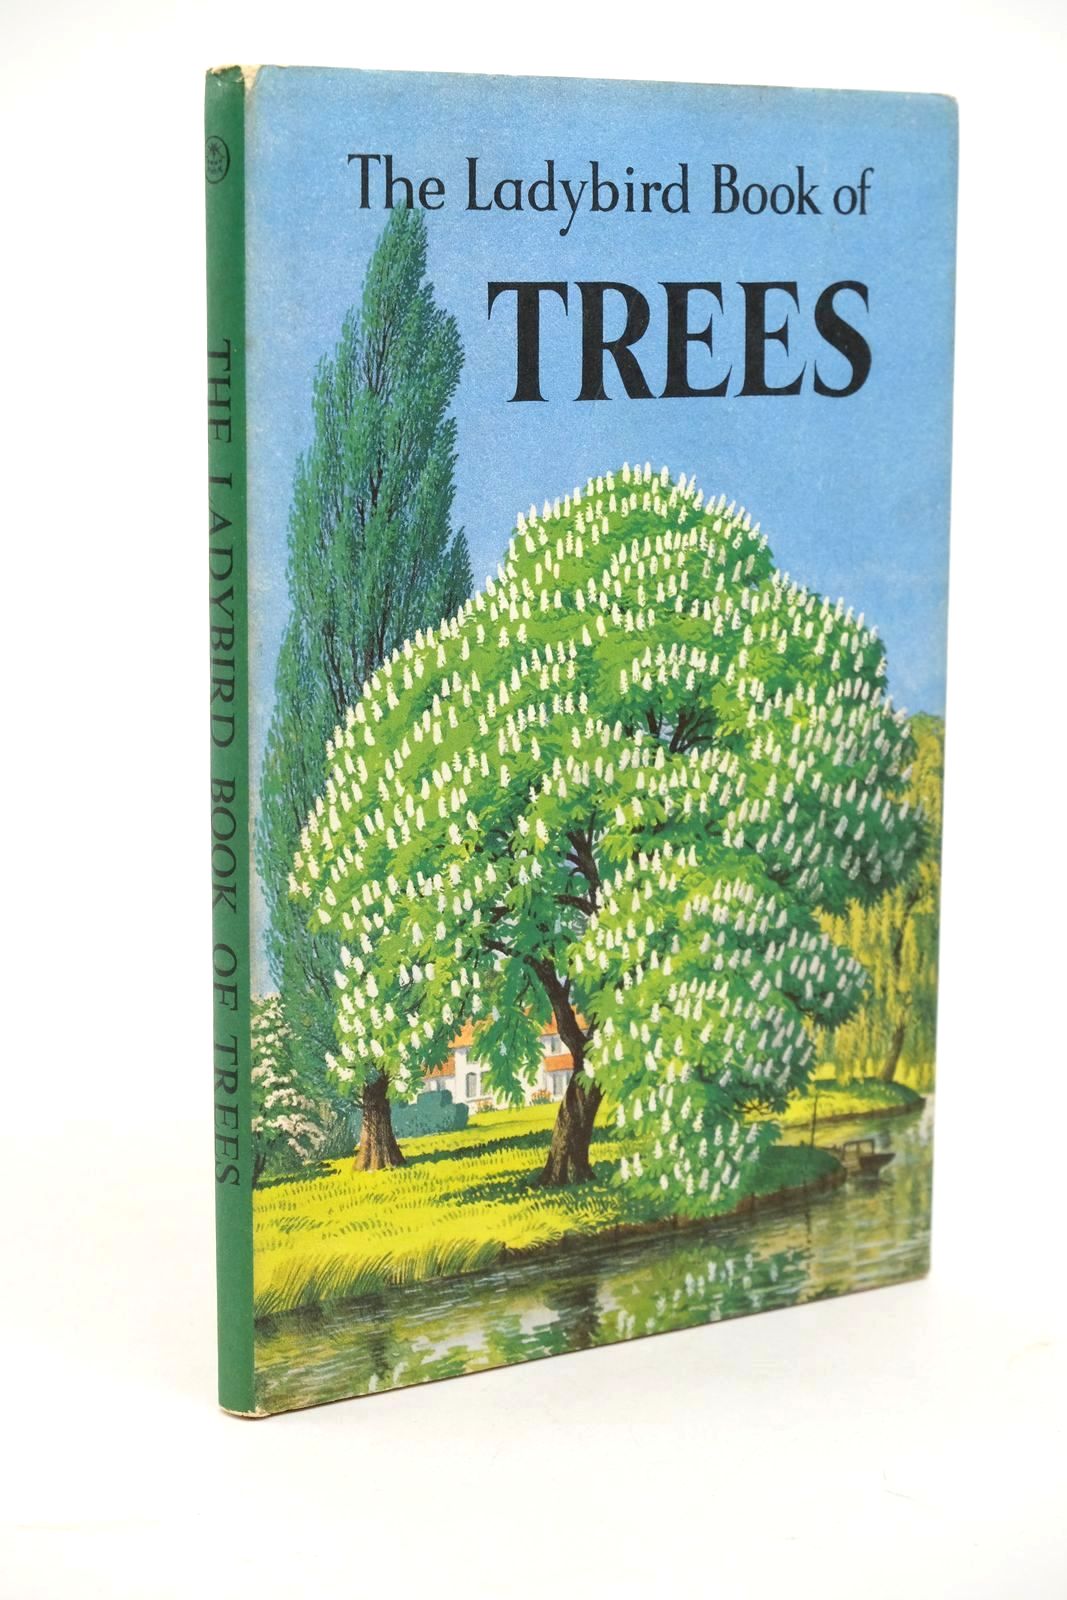 Photo of THE LADYBIRD BOOK OF TREES written by Vesey-Fitzgerald, Brian illustrated by Badmin, S.R. published by Wills &amp; Hepworth Ltd. (STOCK CODE: 1323148)  for sale by Stella & Rose's Books